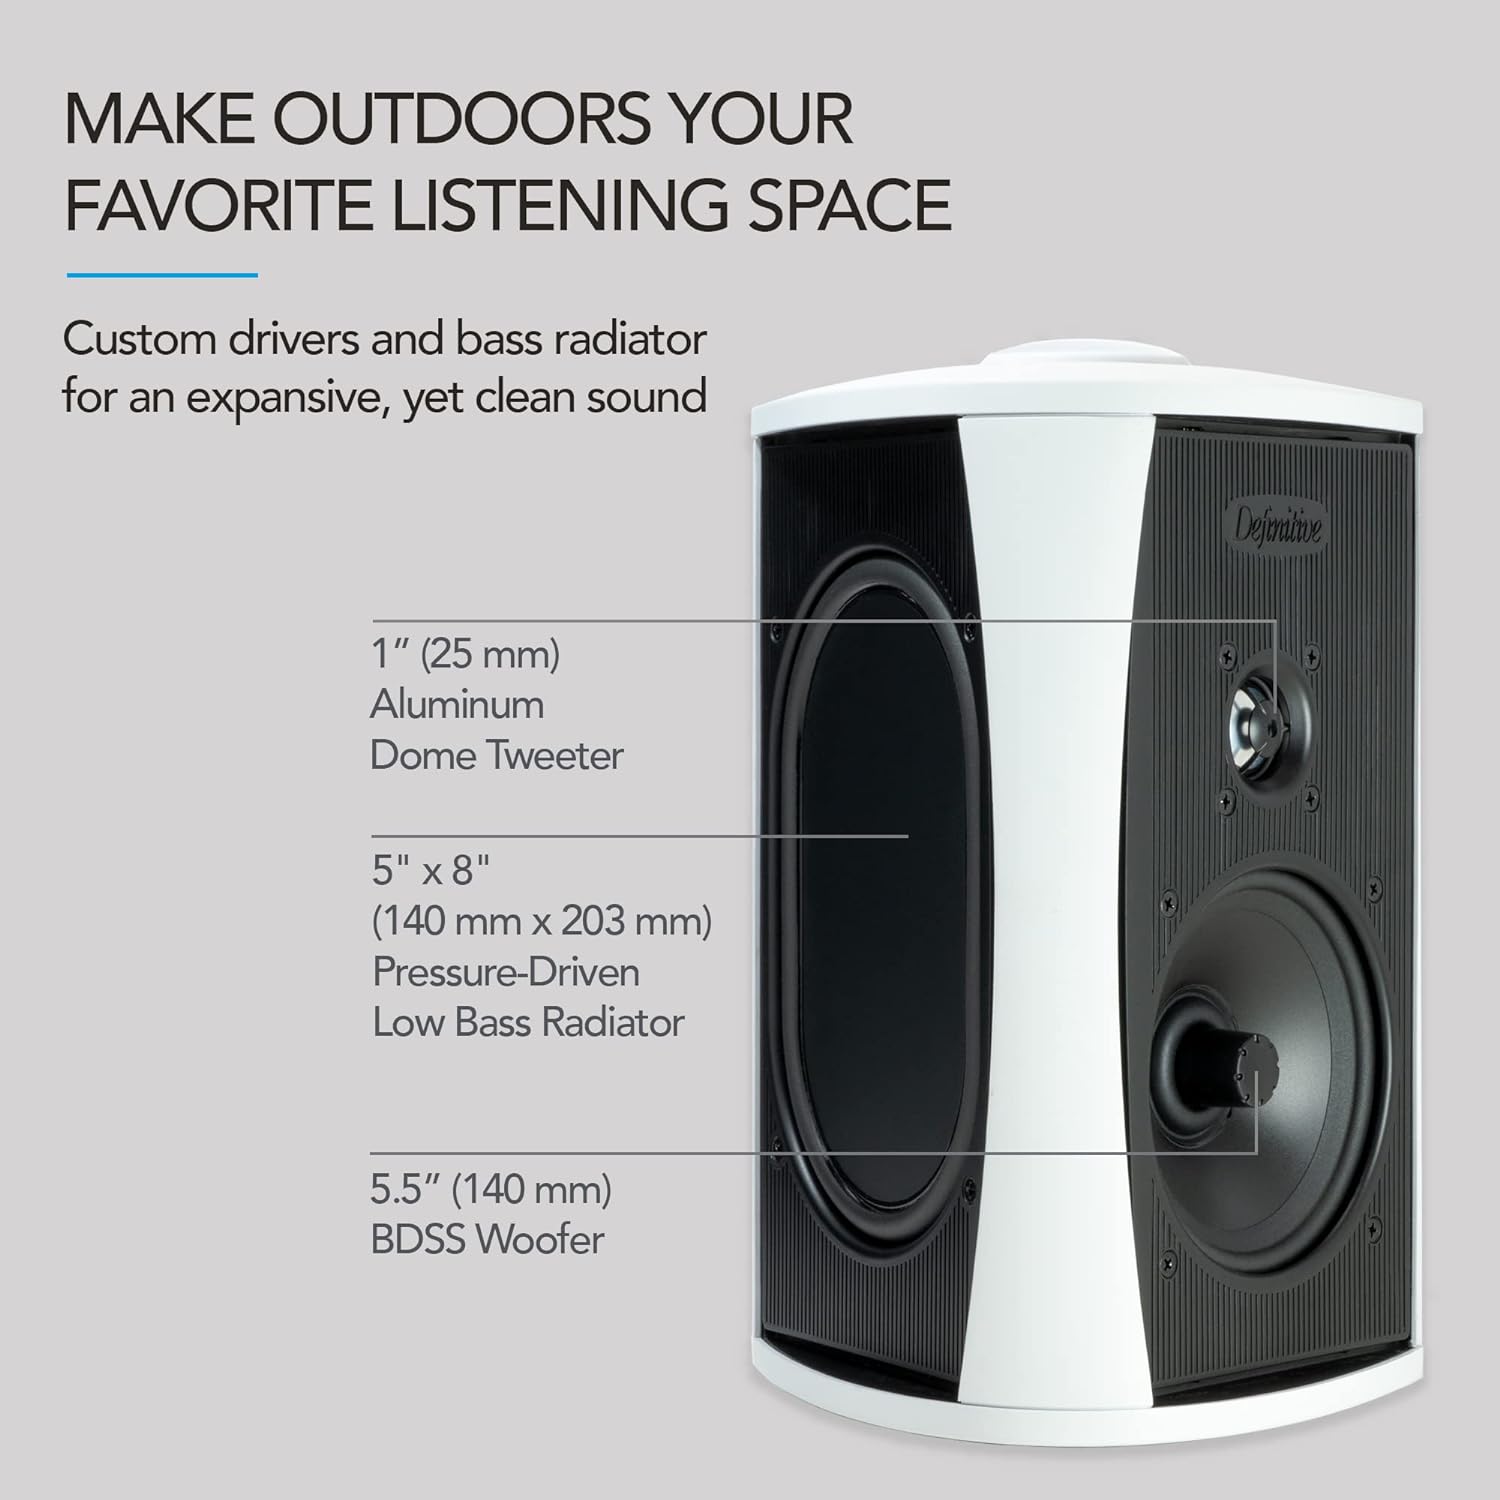 Definitive Technology AW 5500 Outdoor Speaker (Single, White) - image 4 of 8